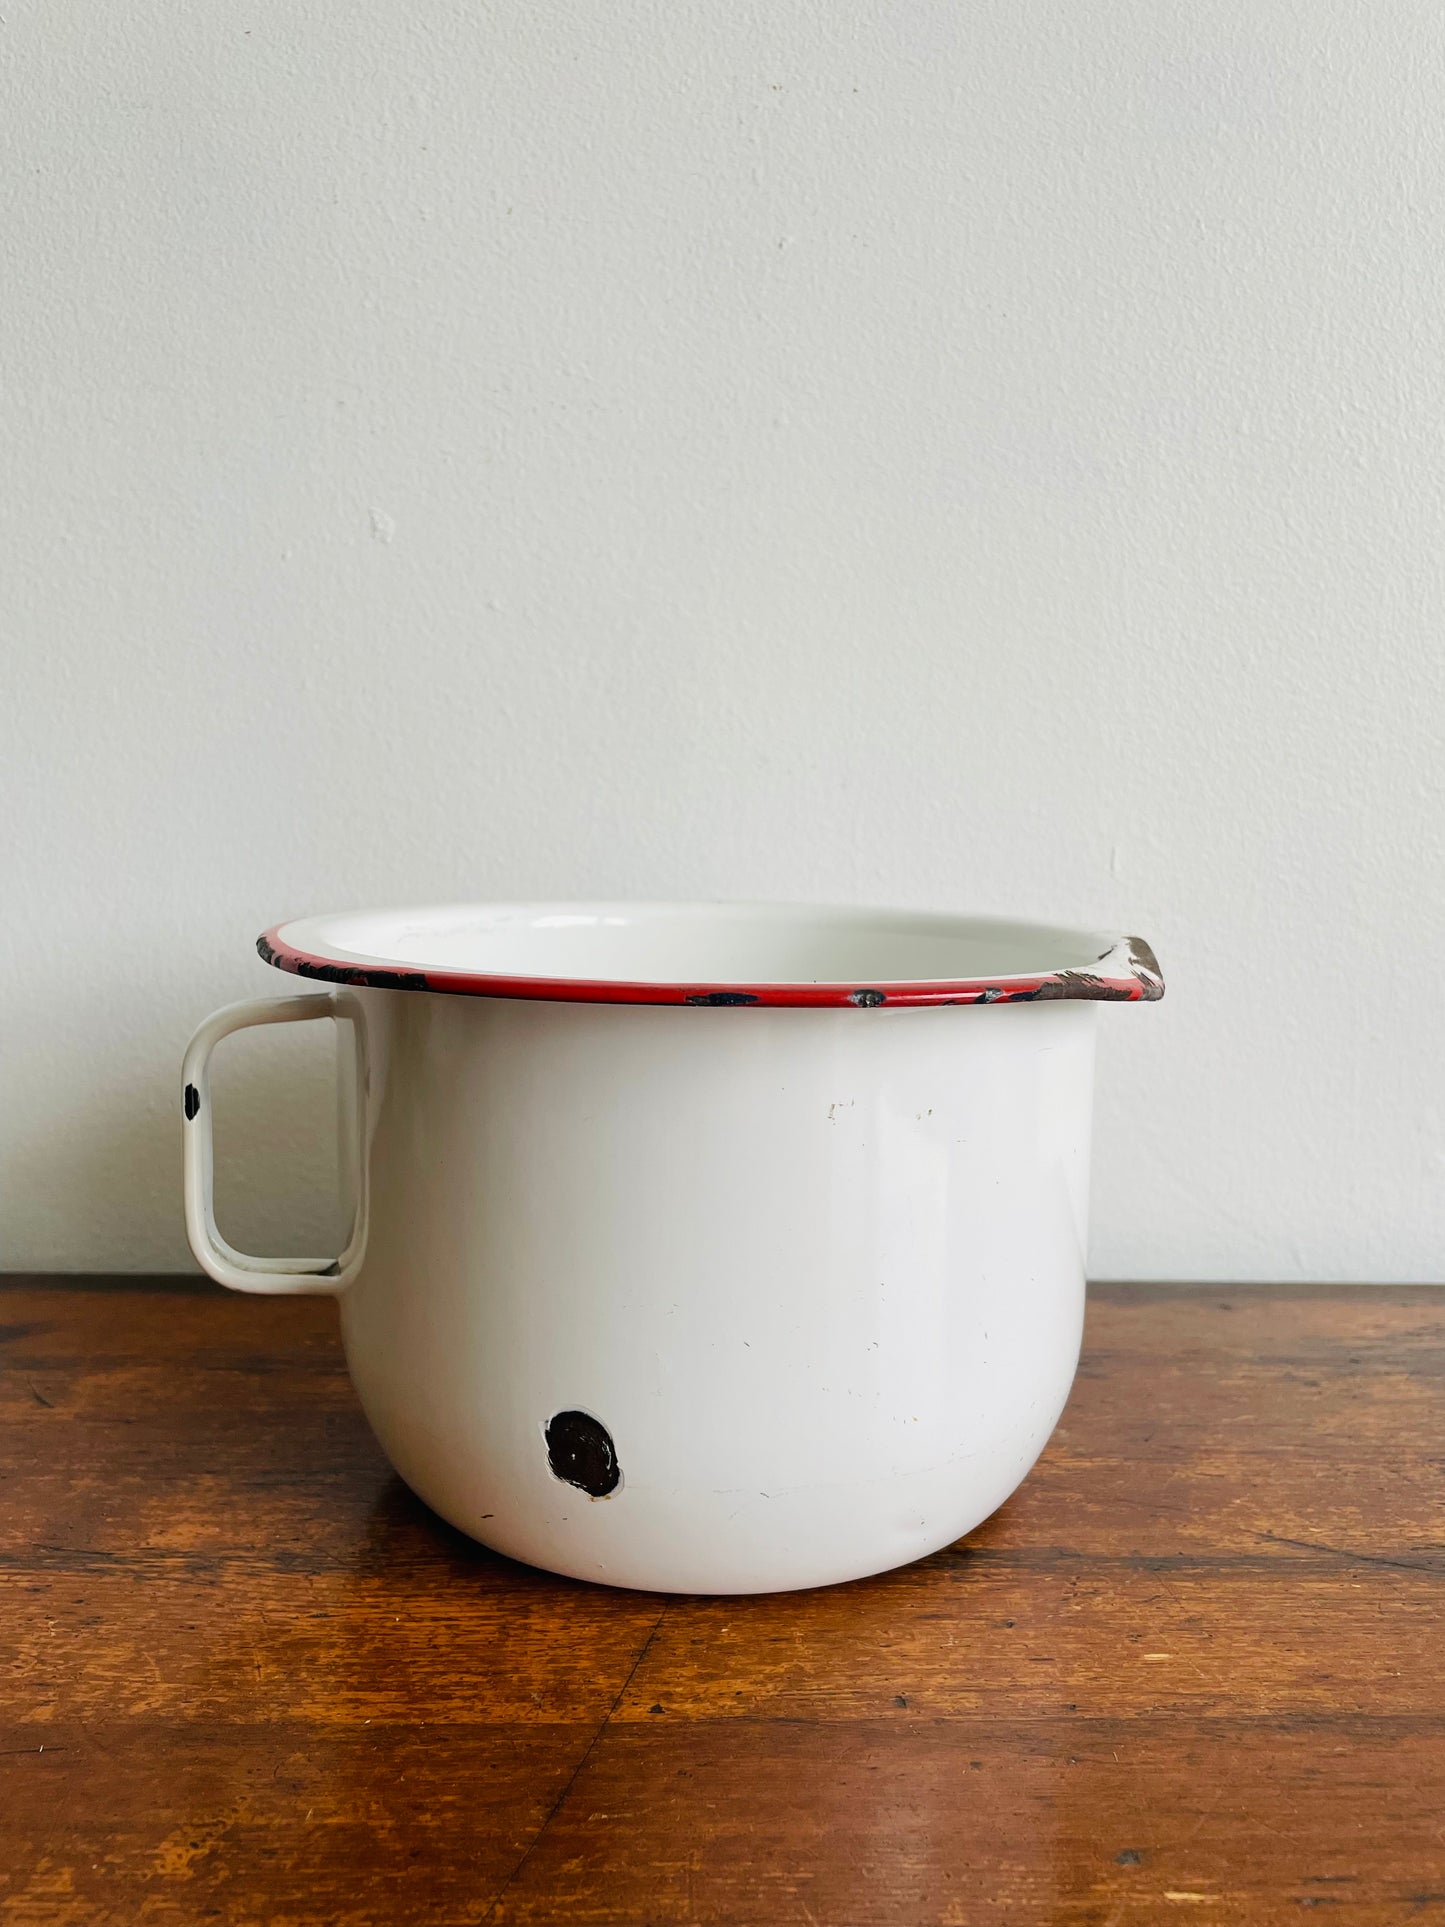 White Enamel Pot with Handle & Red Rim - Makes a Great Plant Pot!